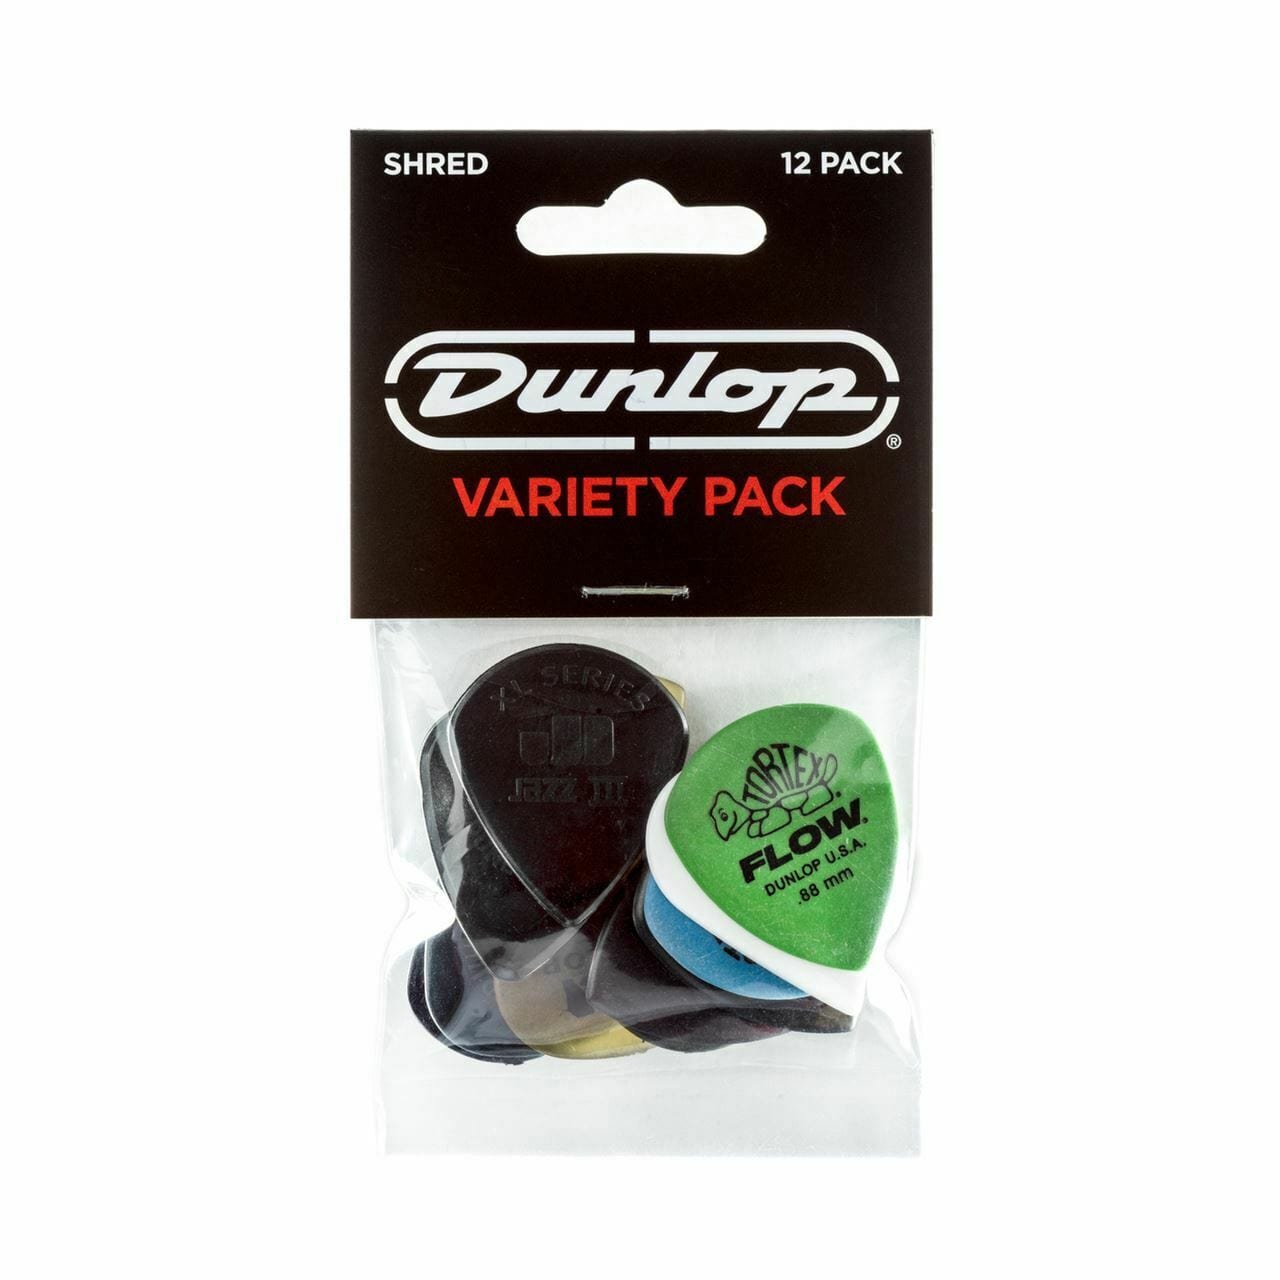 Dunlop PVP118 Shred Variety Guitar Pick Pack